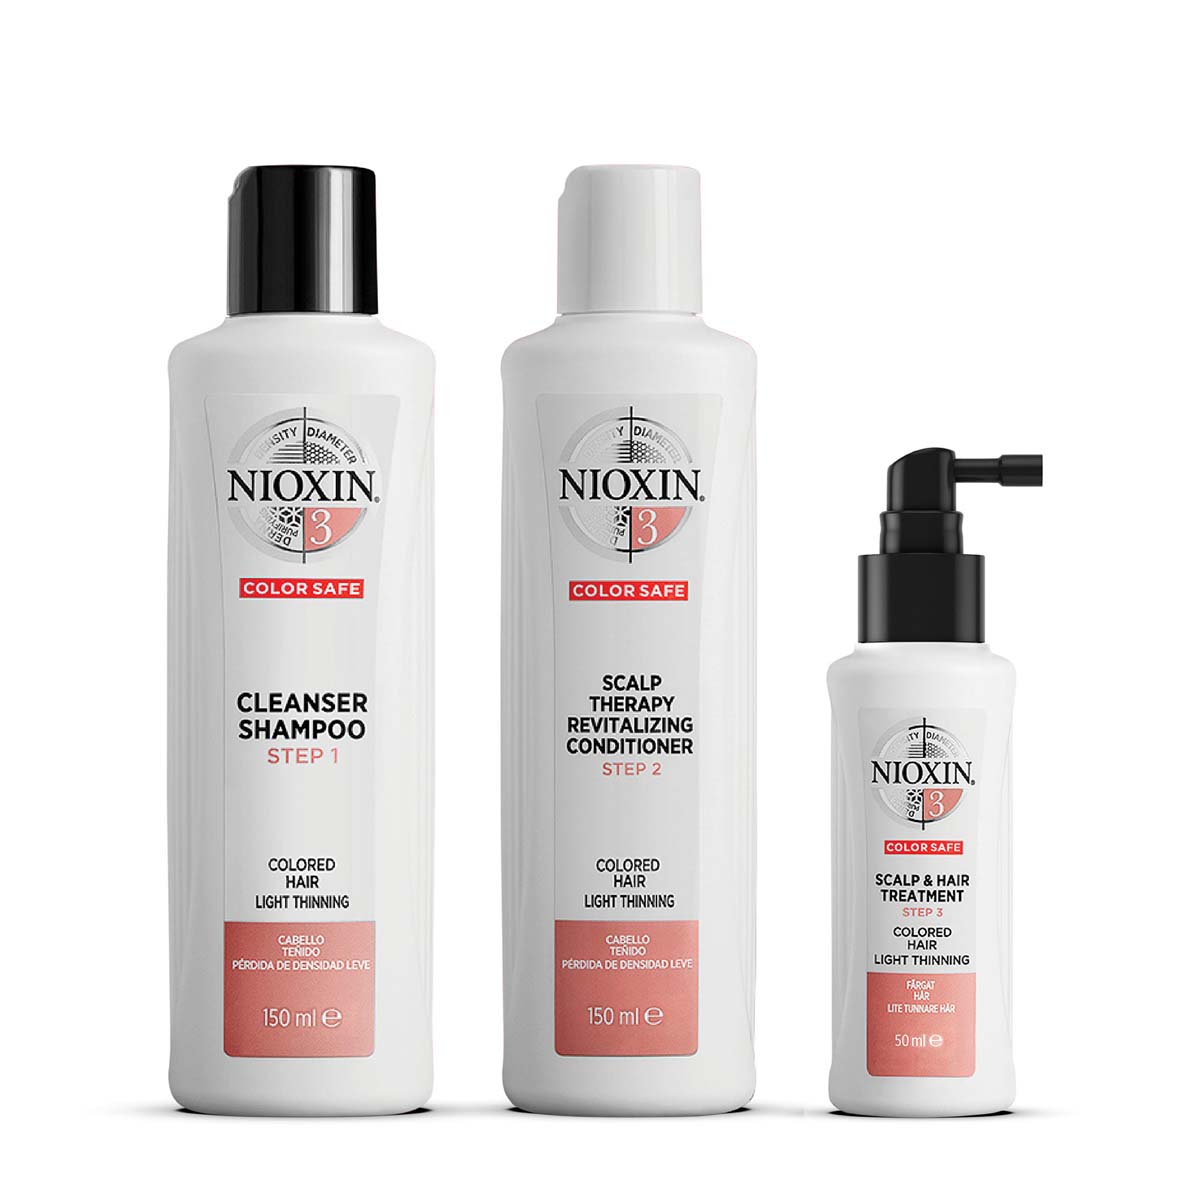 Nioxin 3-Part System Kit 3 For Colored Hair With Light Thinning